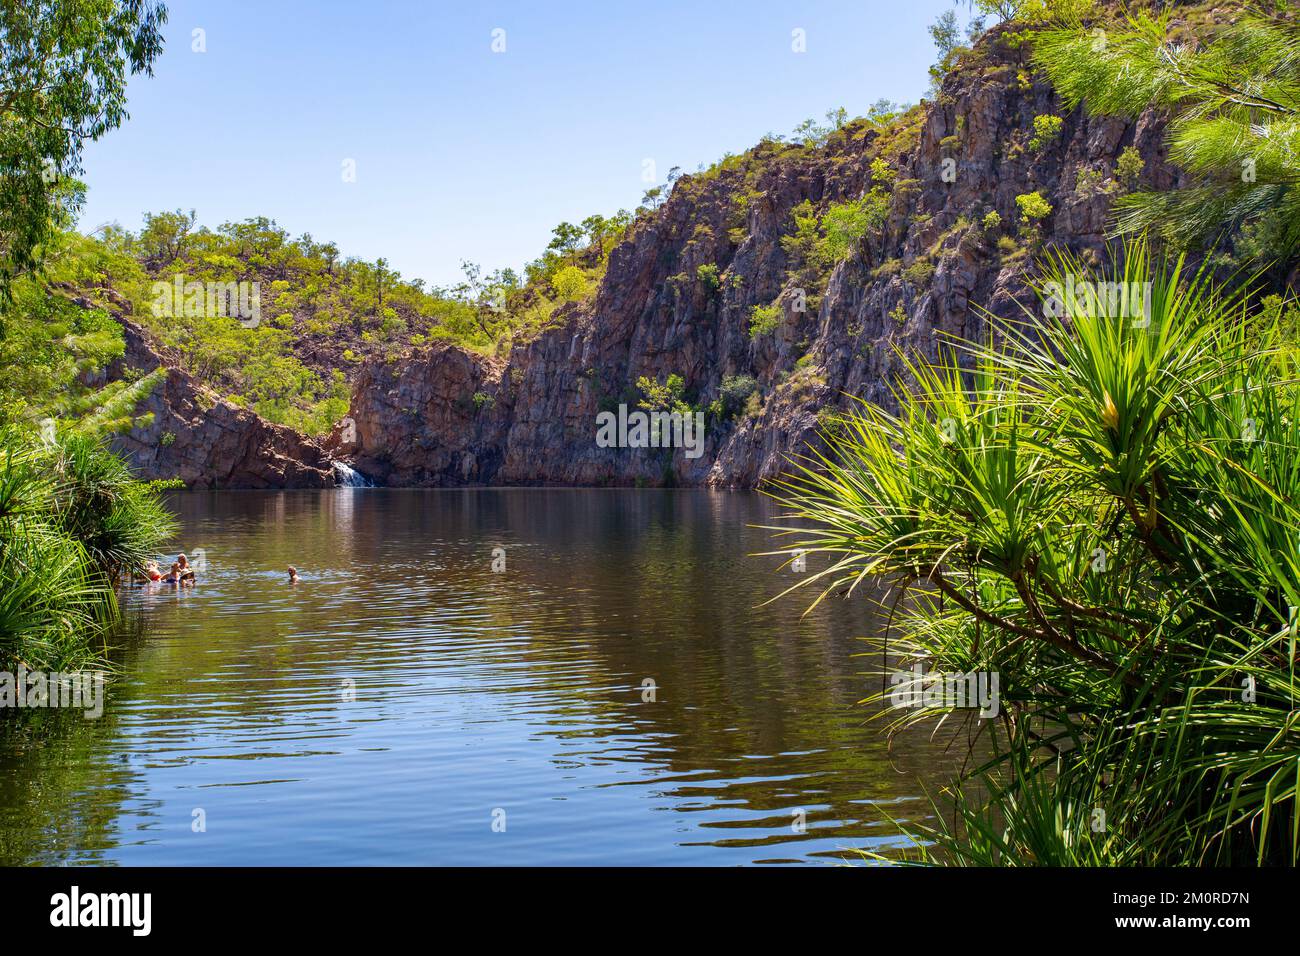 View of the Edith Falls and natural pool of the Leliyn area in the Nitmilik National Park, Northern Territory, Australia Stock Photo